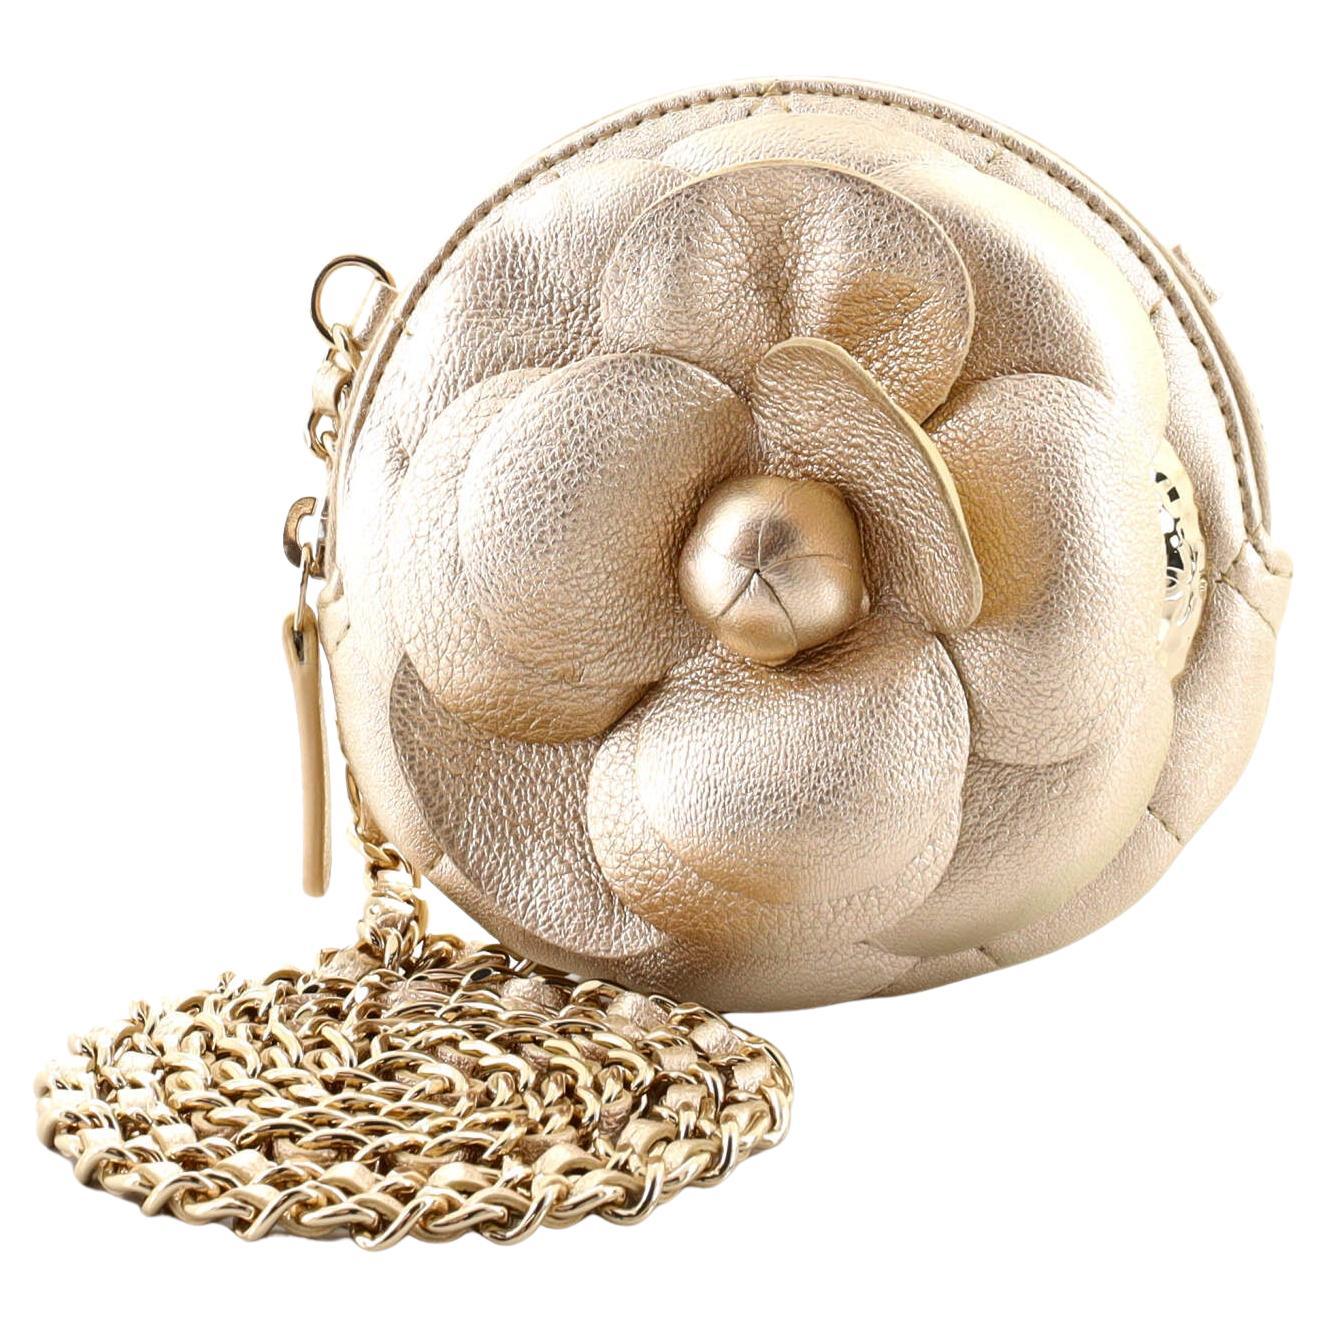 Chanel Camellia Round Clutch with Chain Lambskin